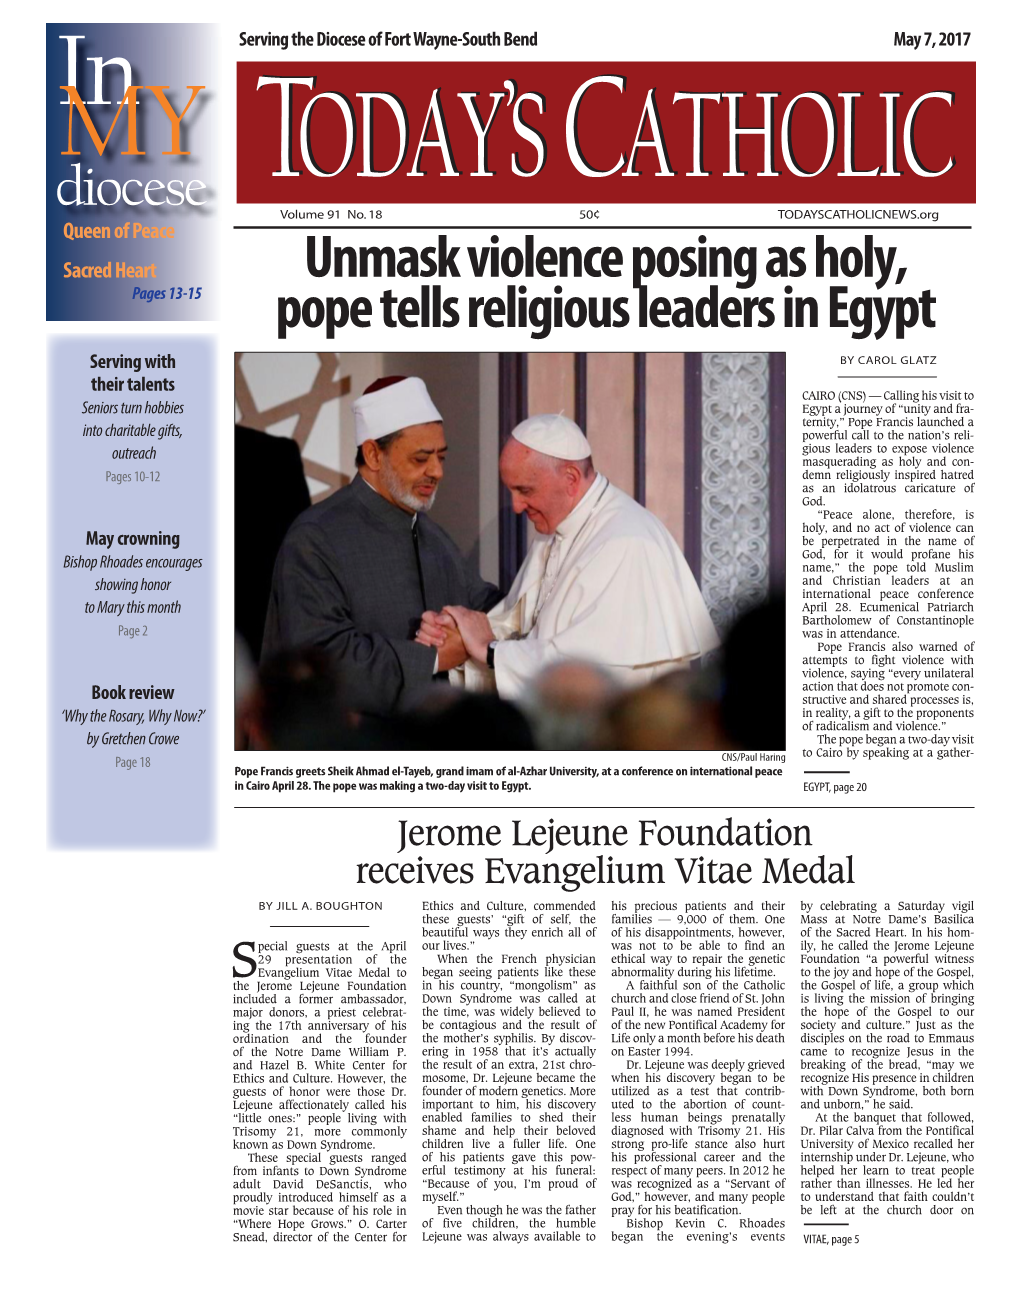 Unmask Violence Posing As Holy, Pope Tells Religious Leaders in Egypt